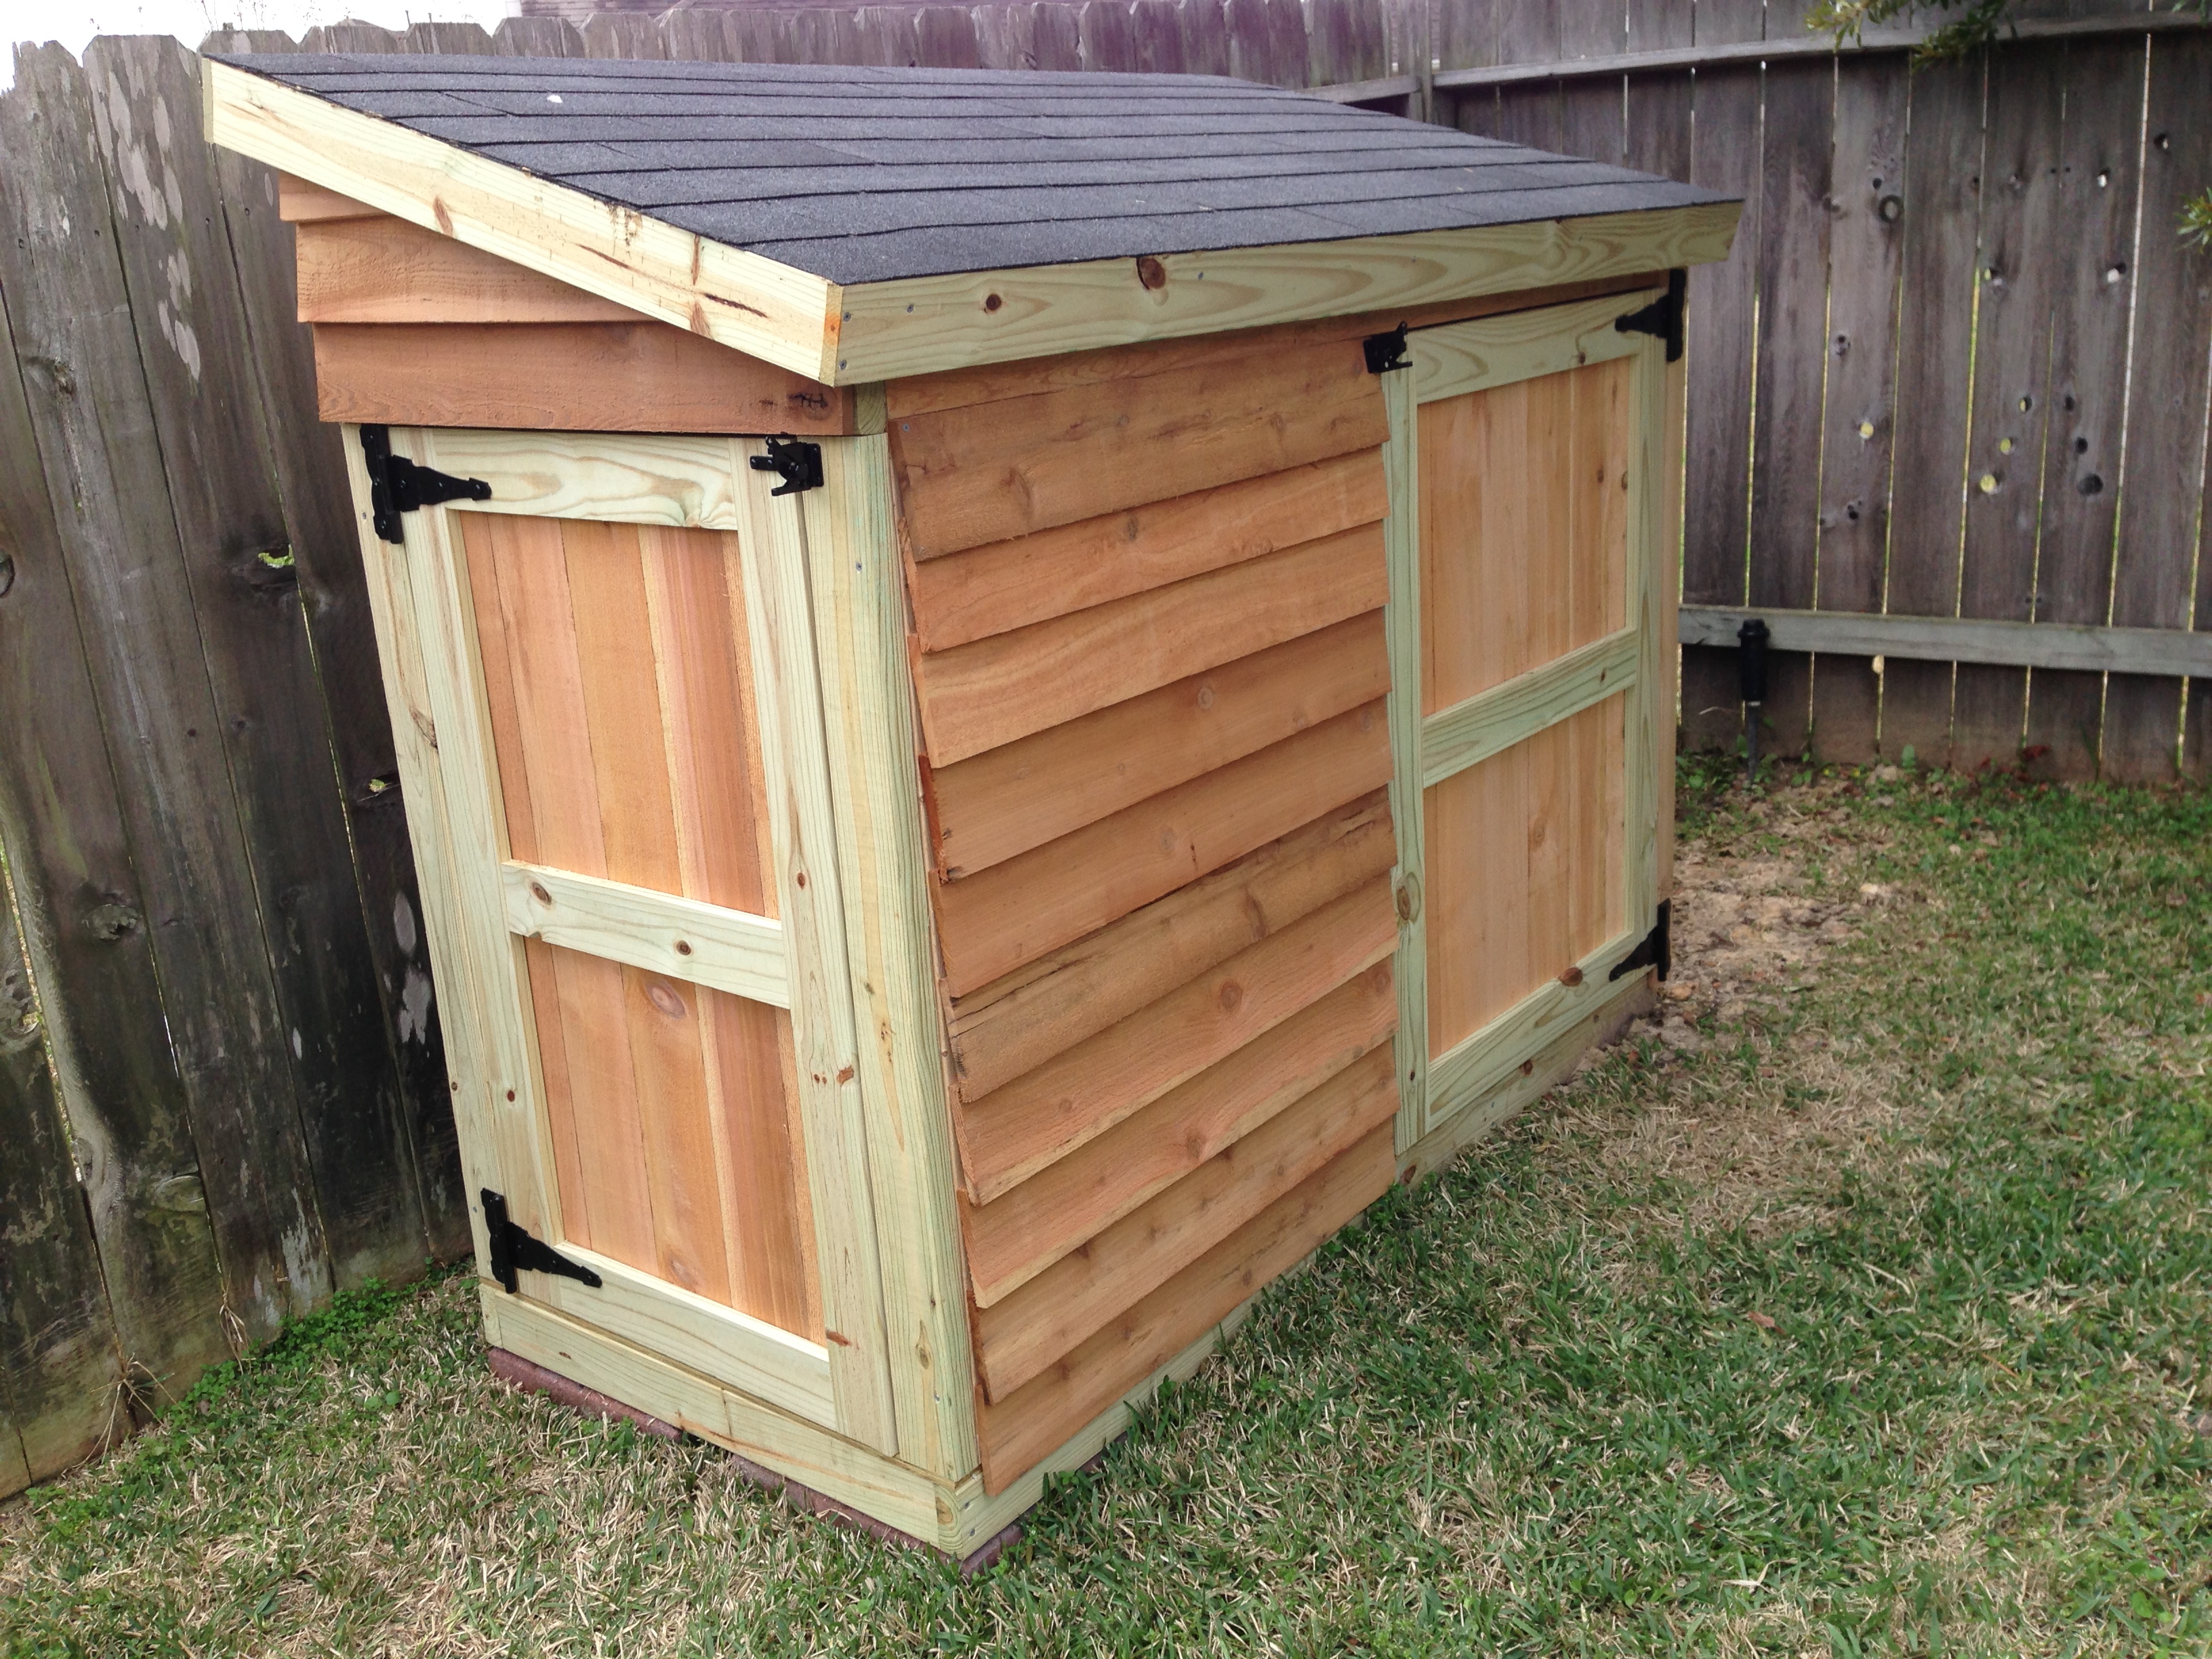 Lawnmower Shed | Ana White